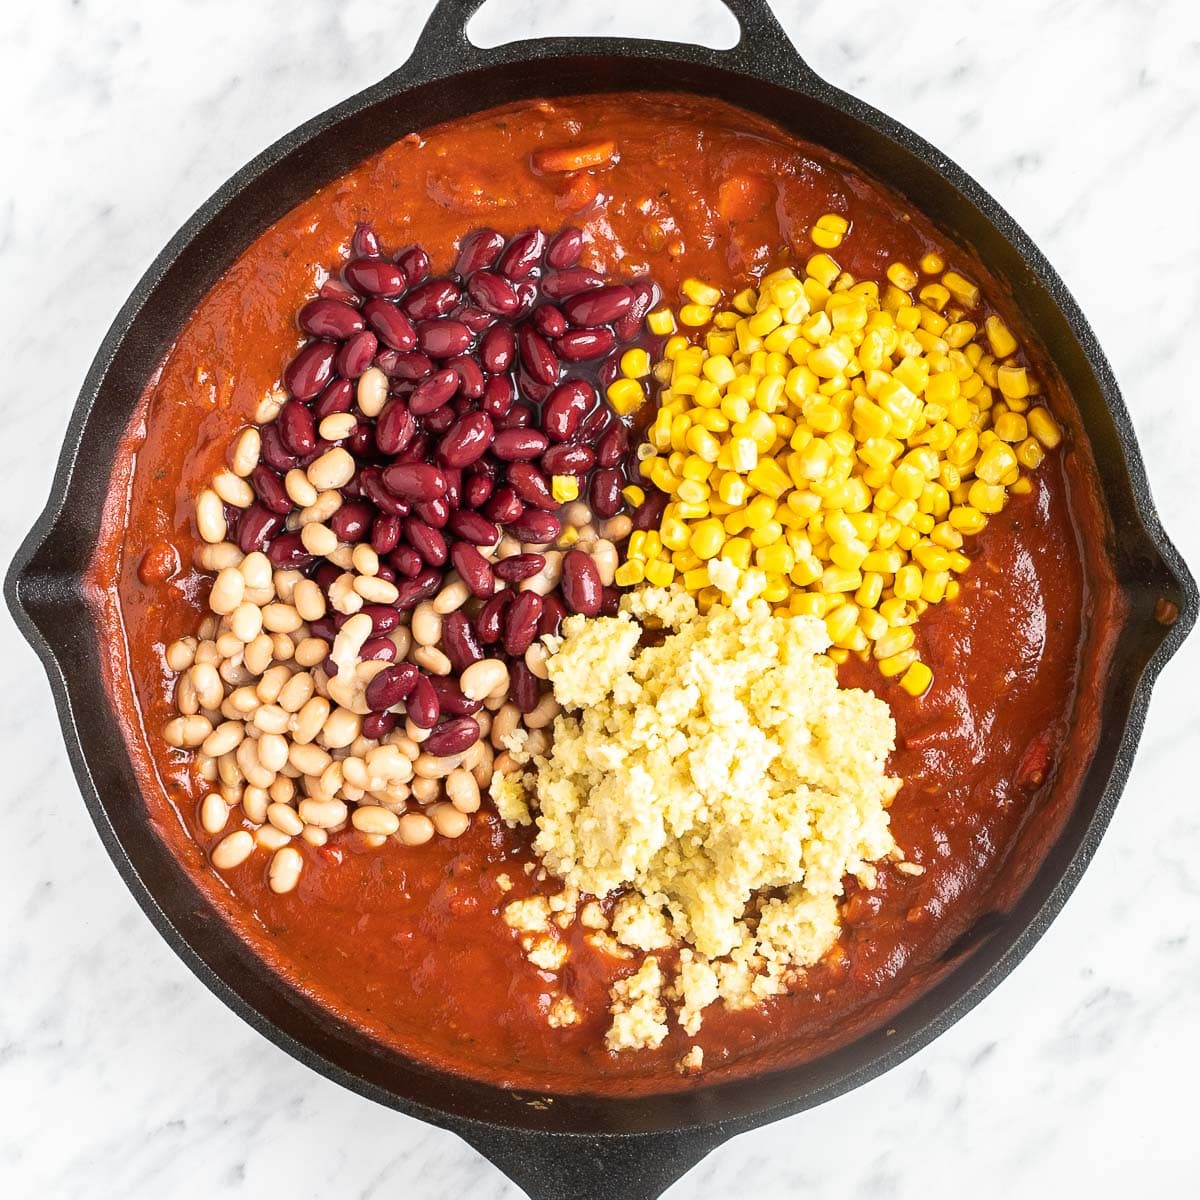 Cast iron skillet with chunky tomato sauce topped with red kidney beans, white beans, sweet corn, and cooked millet.